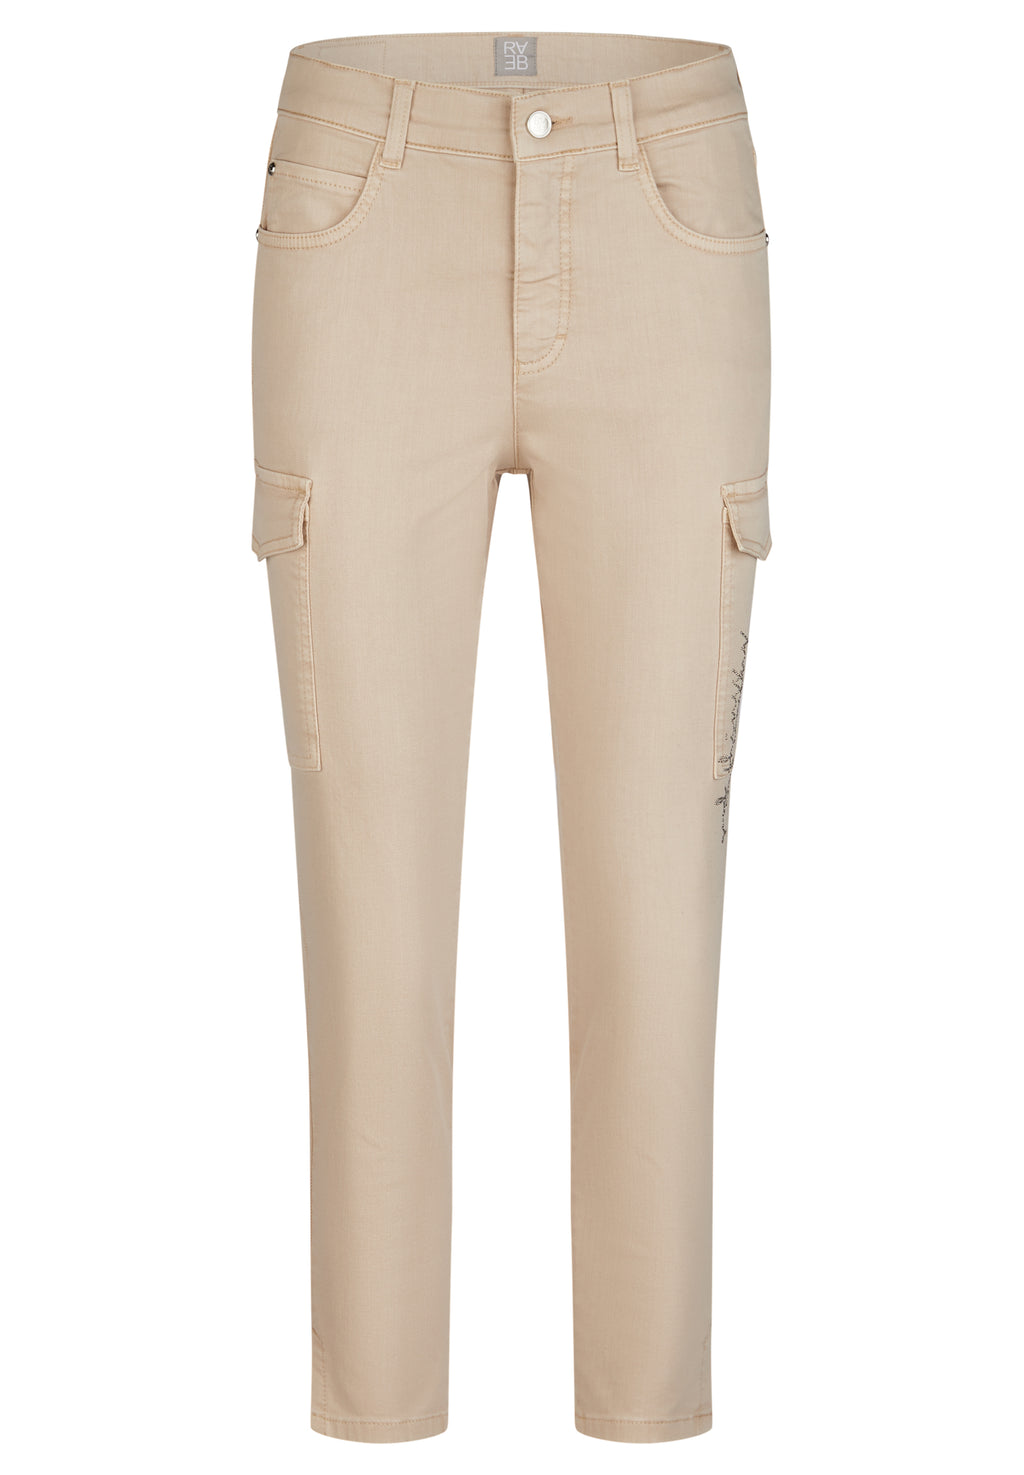 Rabe sunset bay collection denim 7/8th length cargos in beige, product code 52-224151